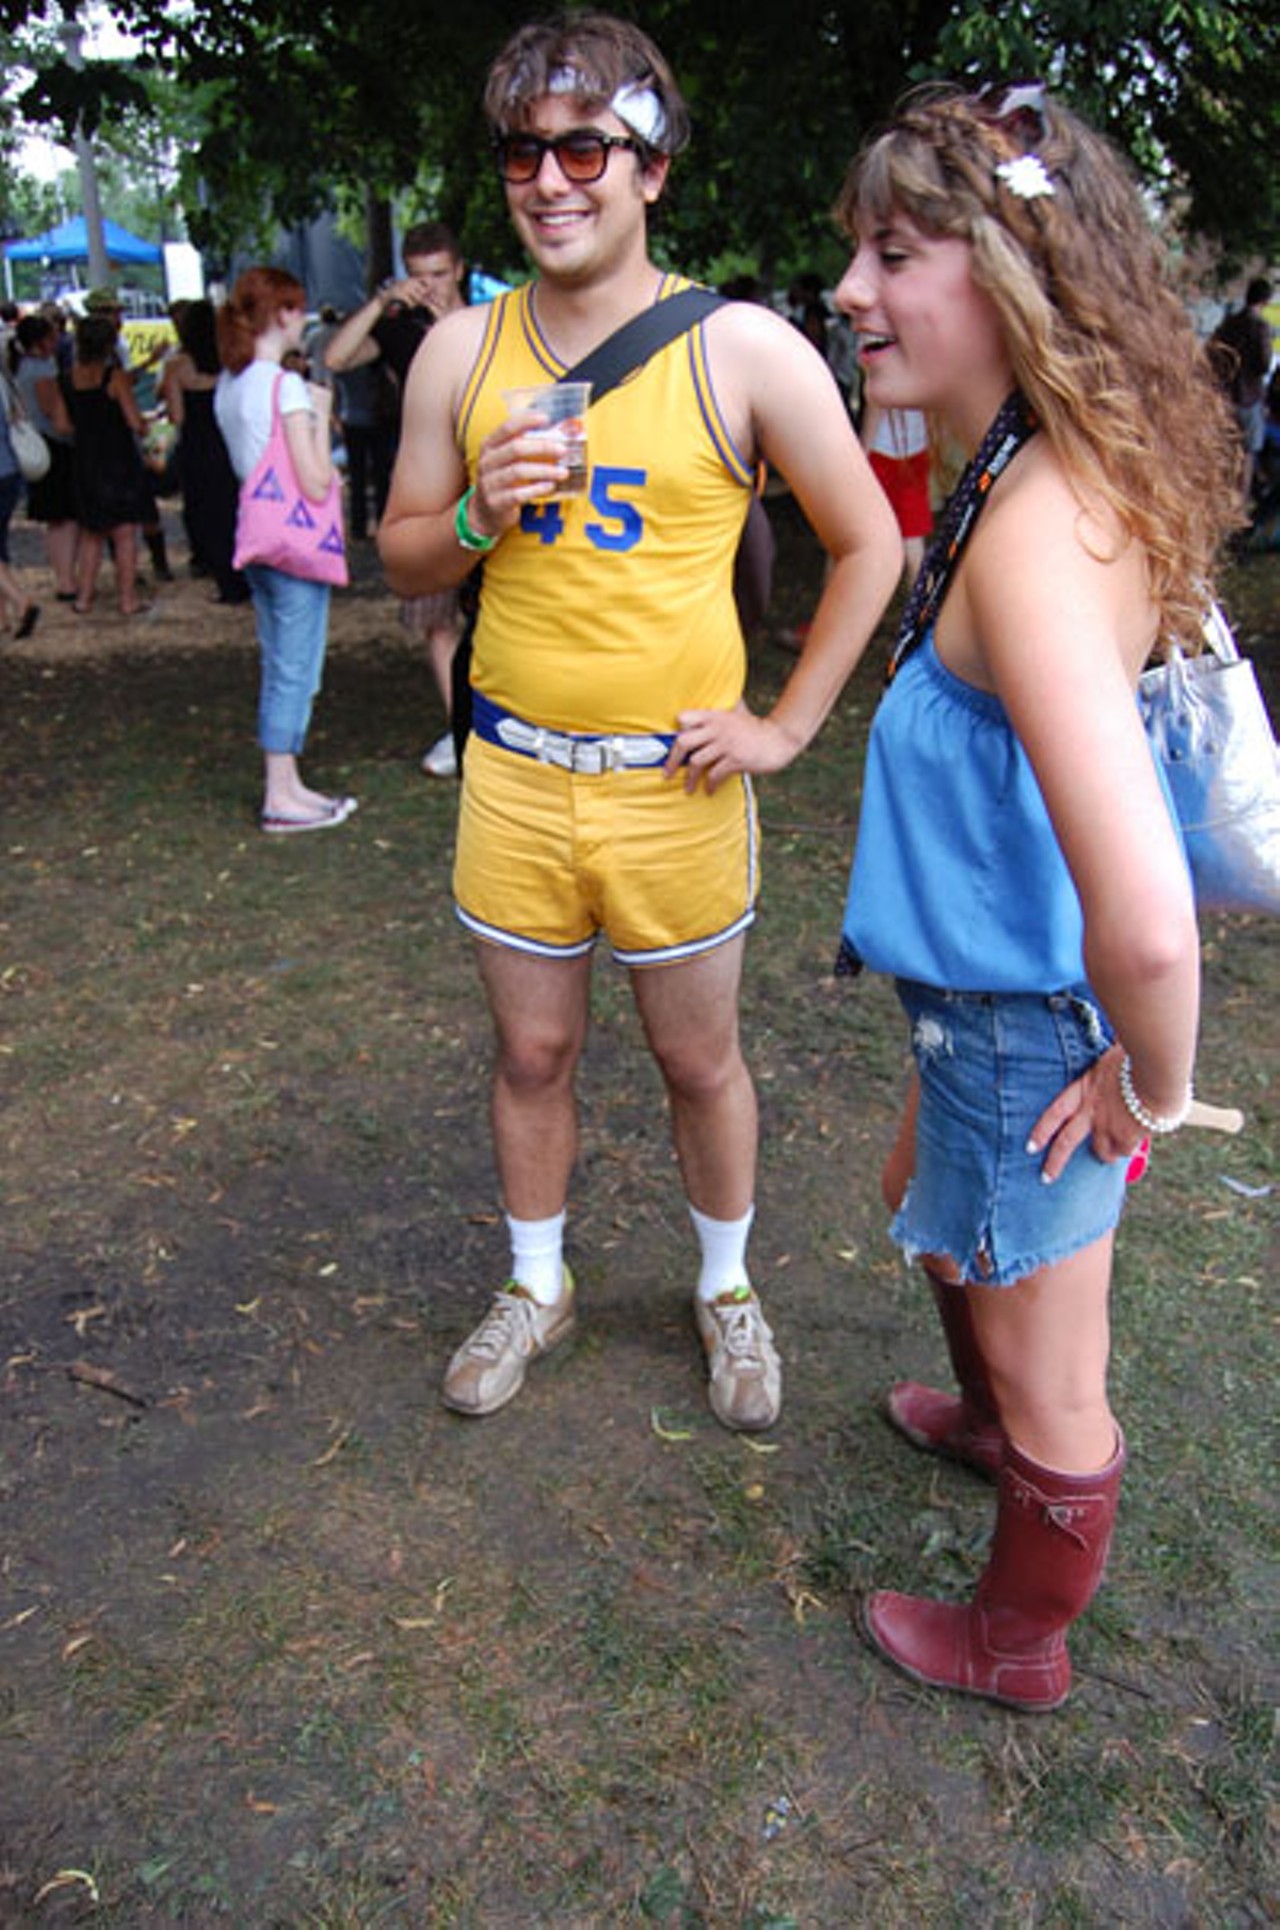 Fashion Do: Short shorts or basketball jersey. Fashion Don't: Wear both at the same time, looking like a pudgy member of the 1981 Los Angeles Lakers.
More photos and set reviews.